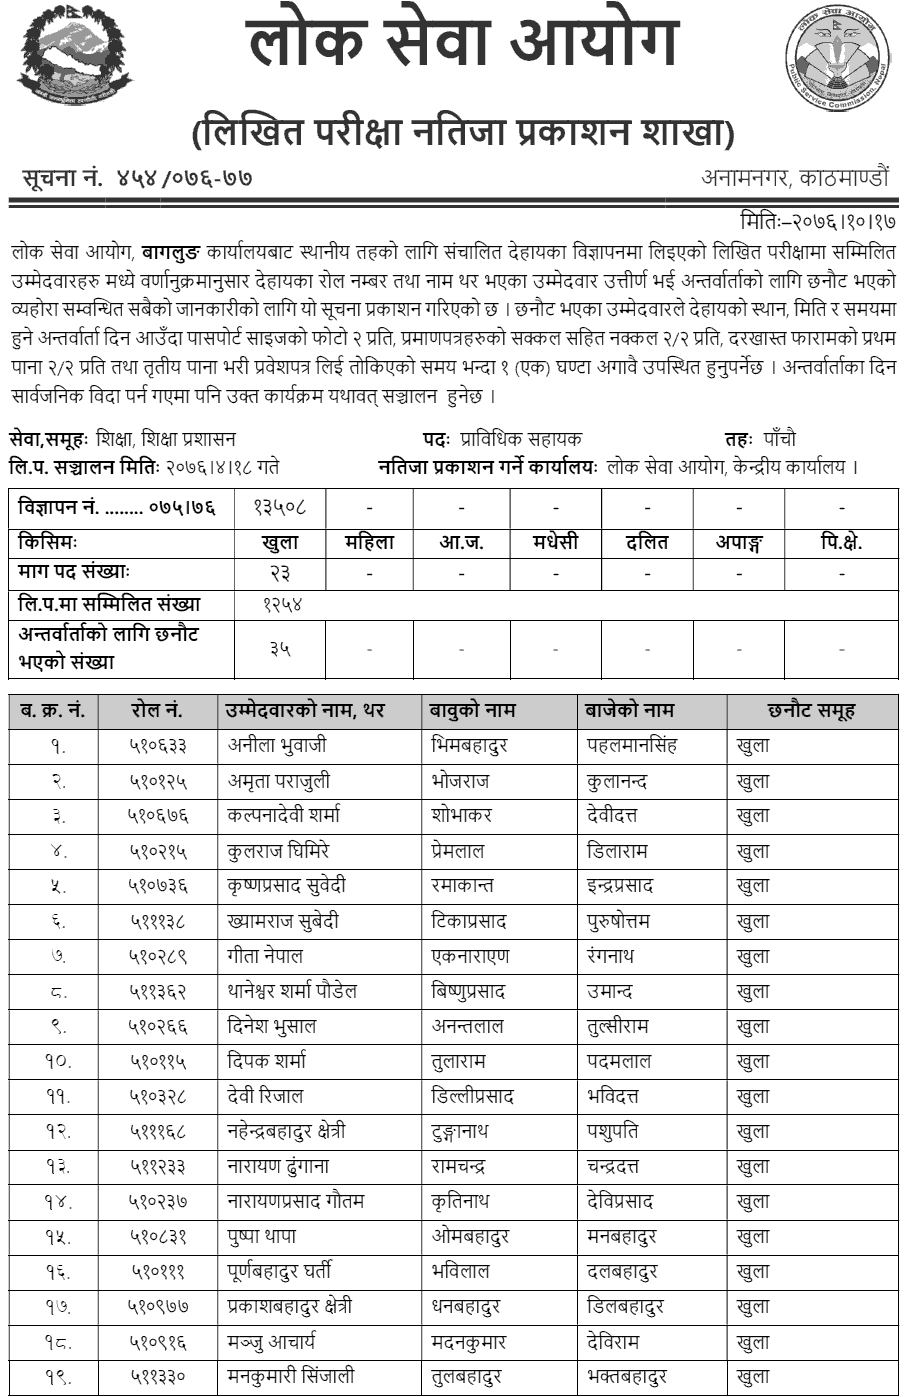 Lok Sewa Aayog Baglung Local Level 5th Education Technical Assistant Written Exam Result